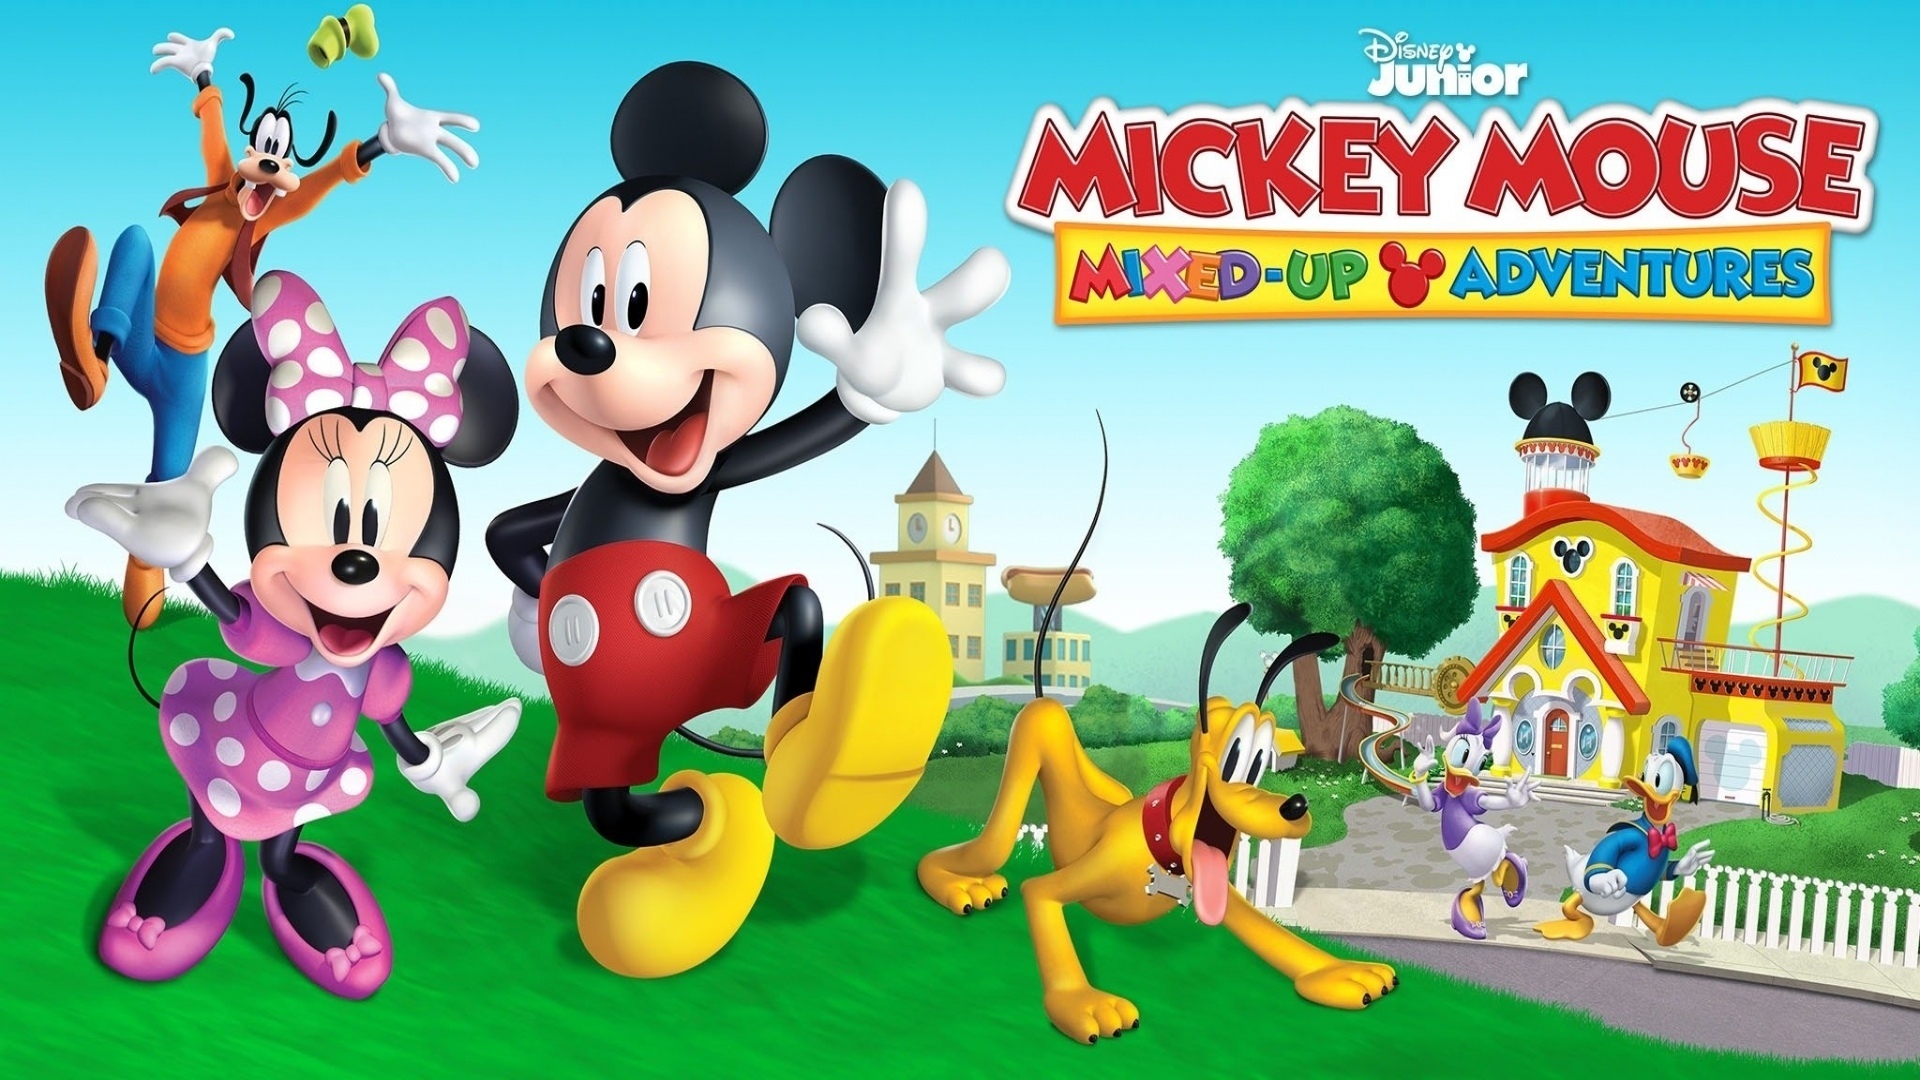 Mickey mouse mixed-up adventures theme song